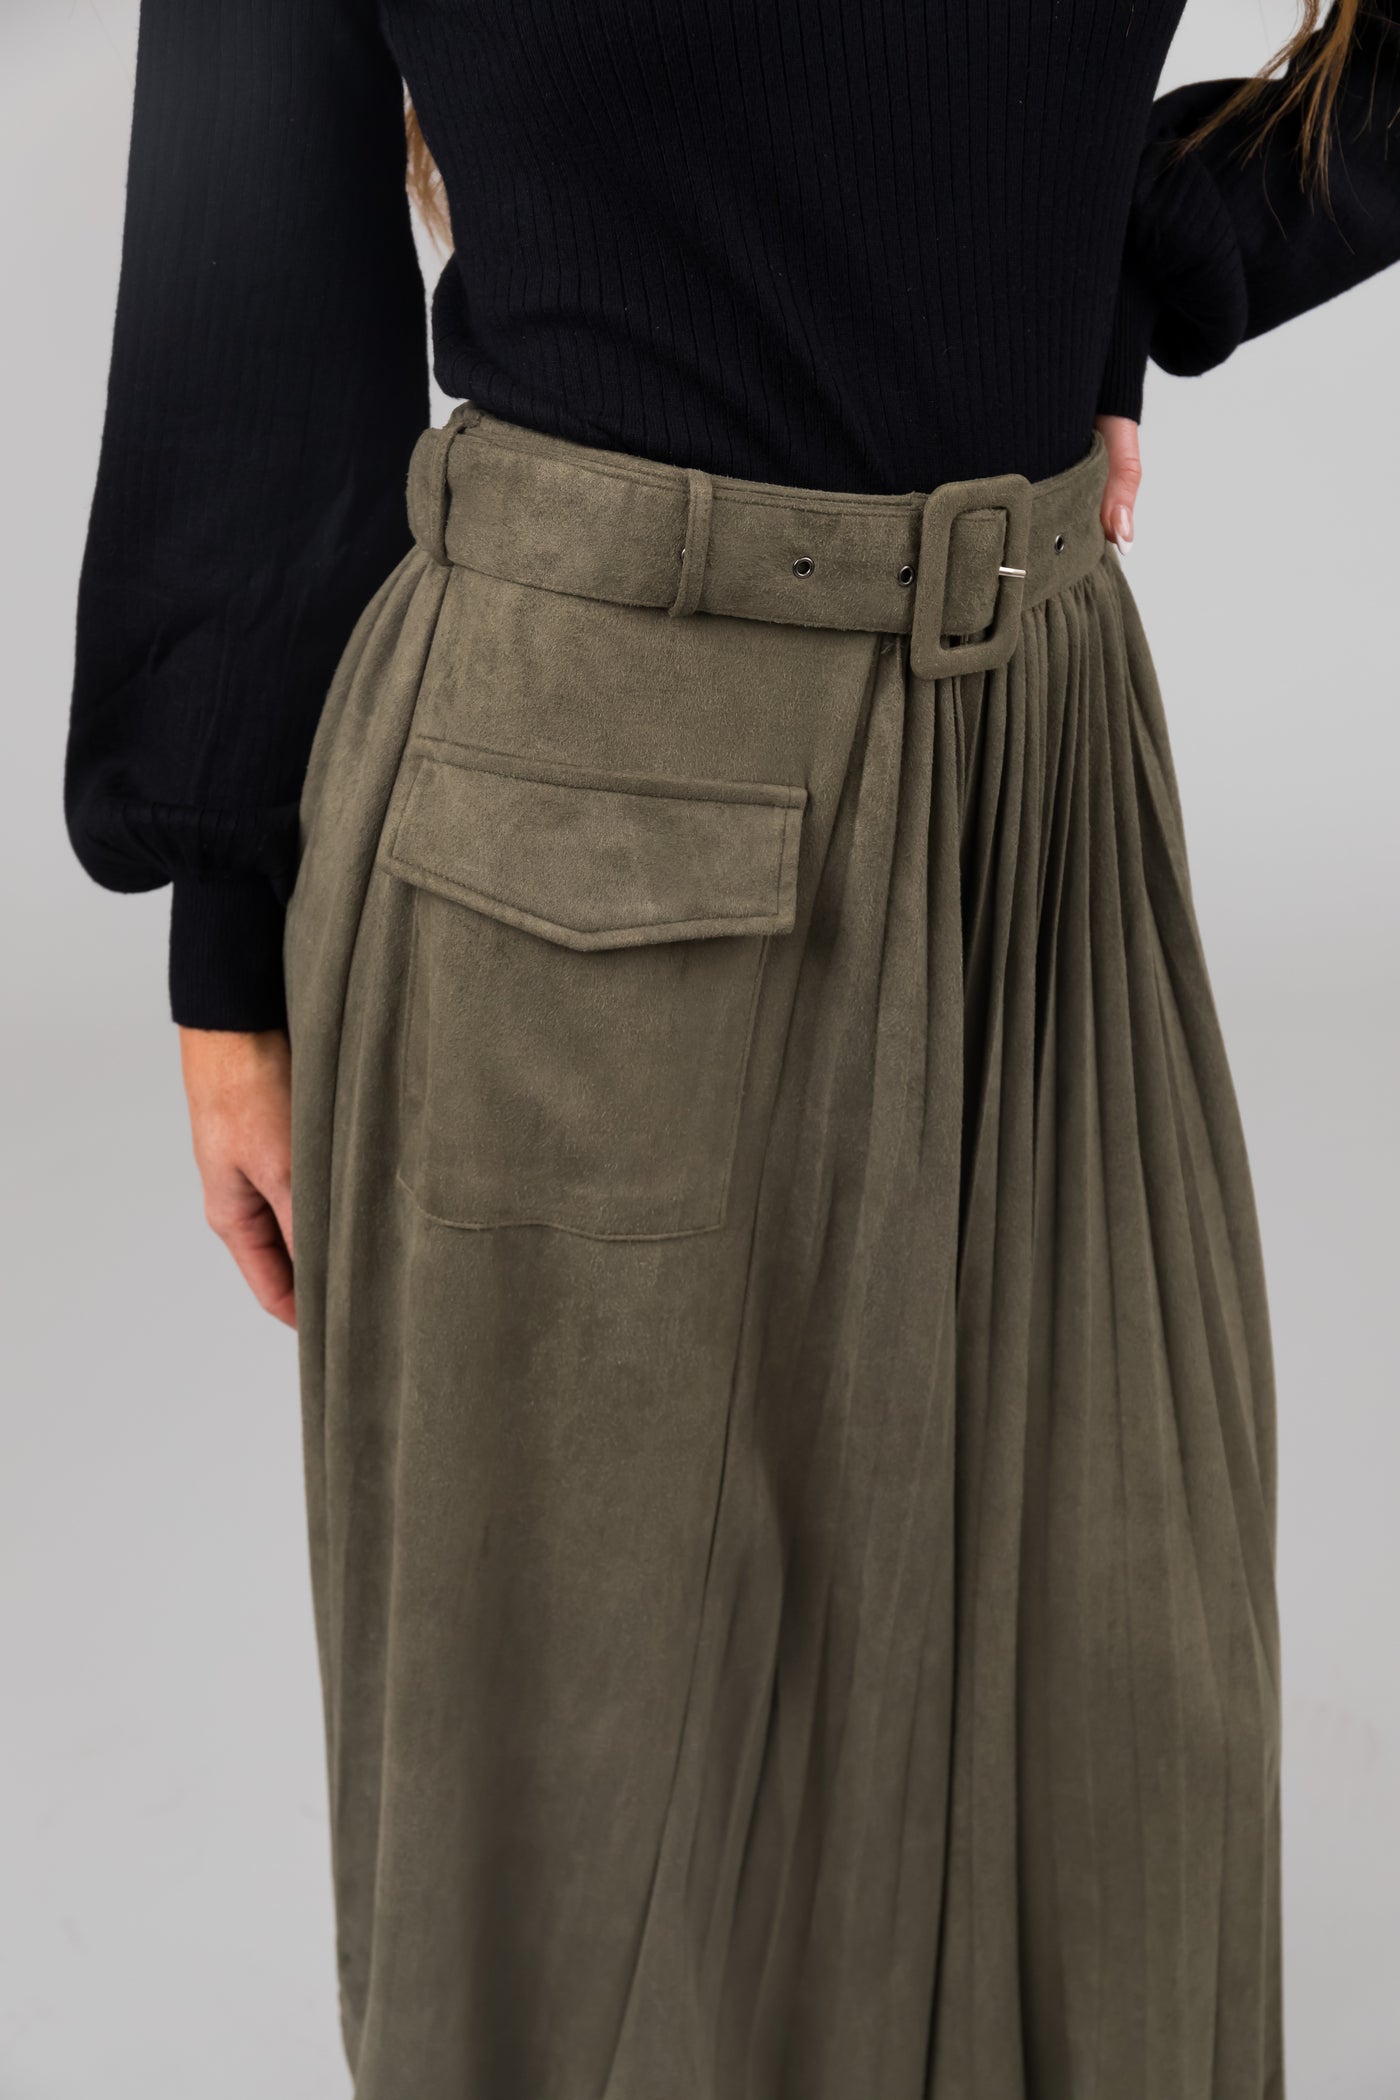 Olive Faux Suede Pleated Midi Skirt with Belt